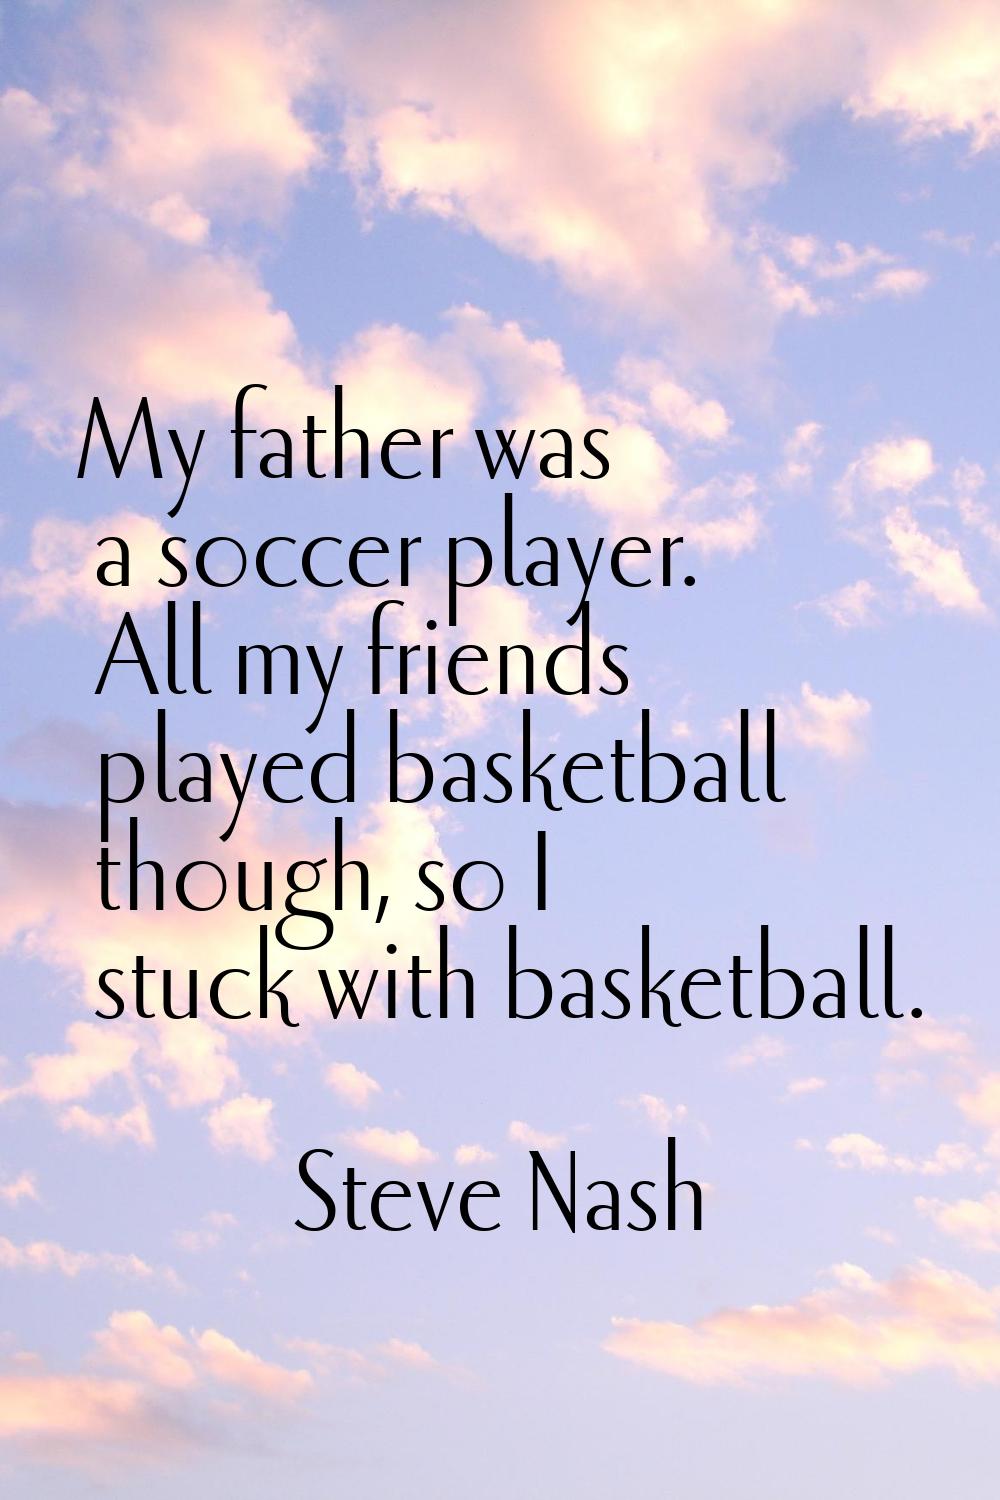 My father was a soccer player. All my friends played basketball though, so I stuck with basketball.